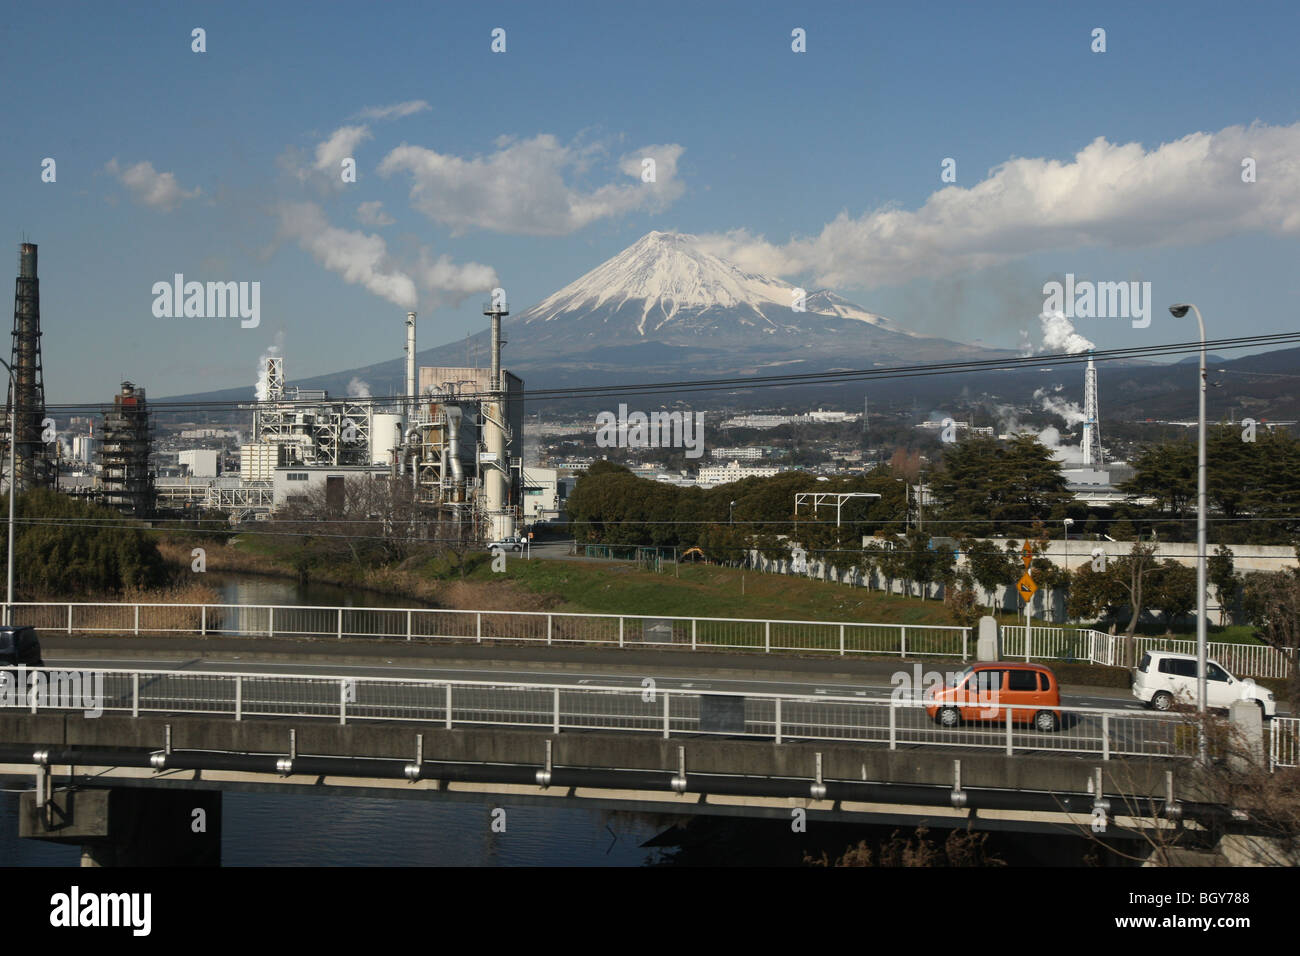 Mount Fuji, seen behind a backdrop of agricultural and industrial landscape, from a shinkansen bullet train window, Japan. Stock Photo